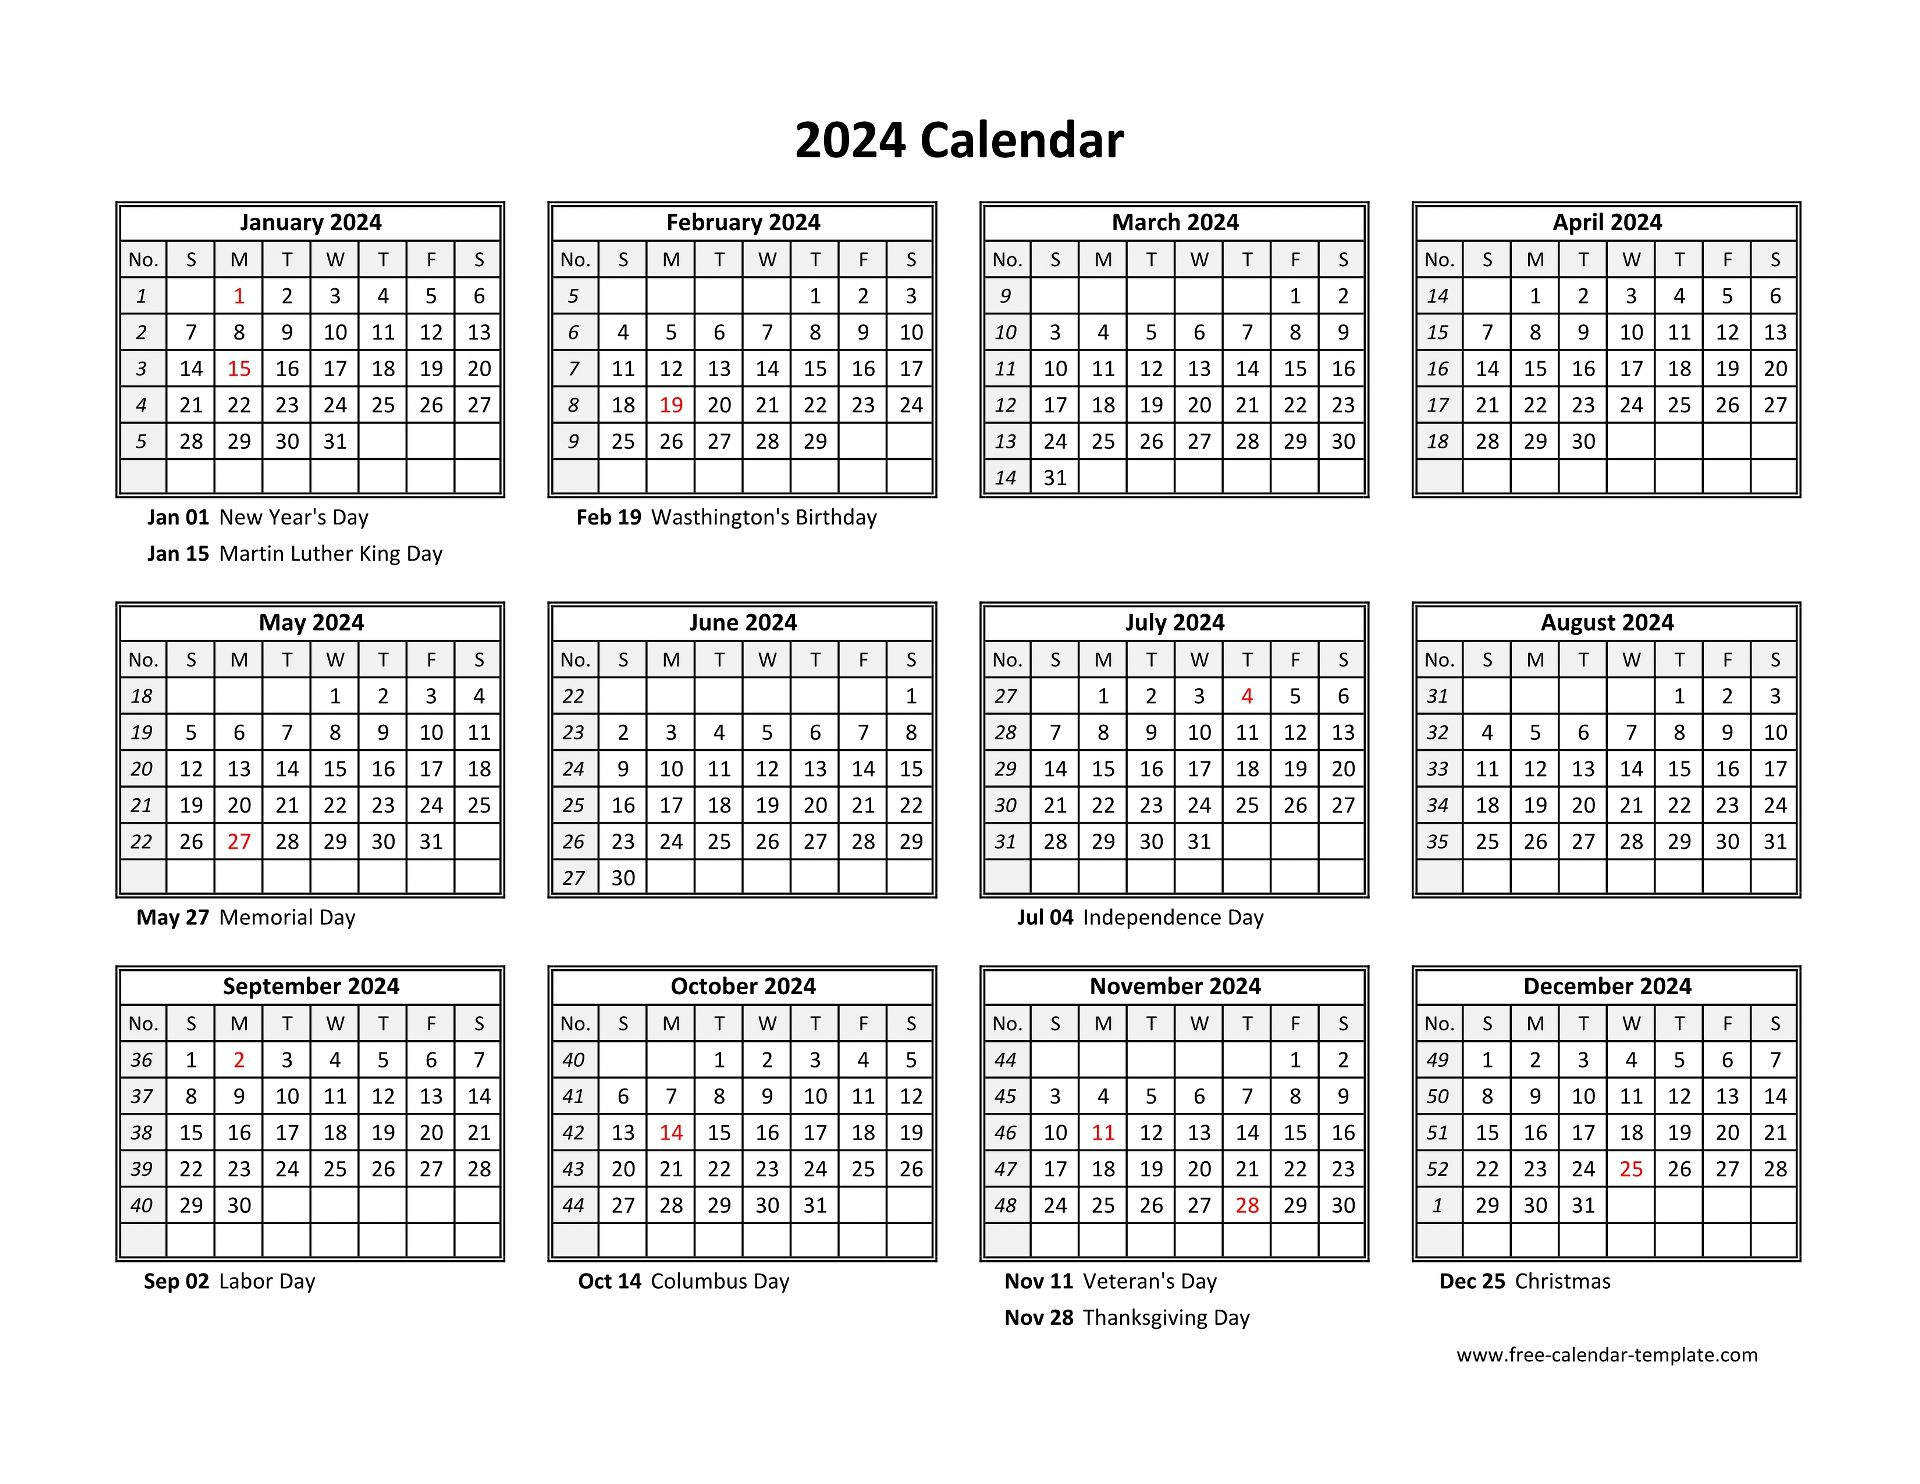 Yearly Calendar 2024 Printable With Federal Holidays | Free | 2024 Printable Calendar With Holidays